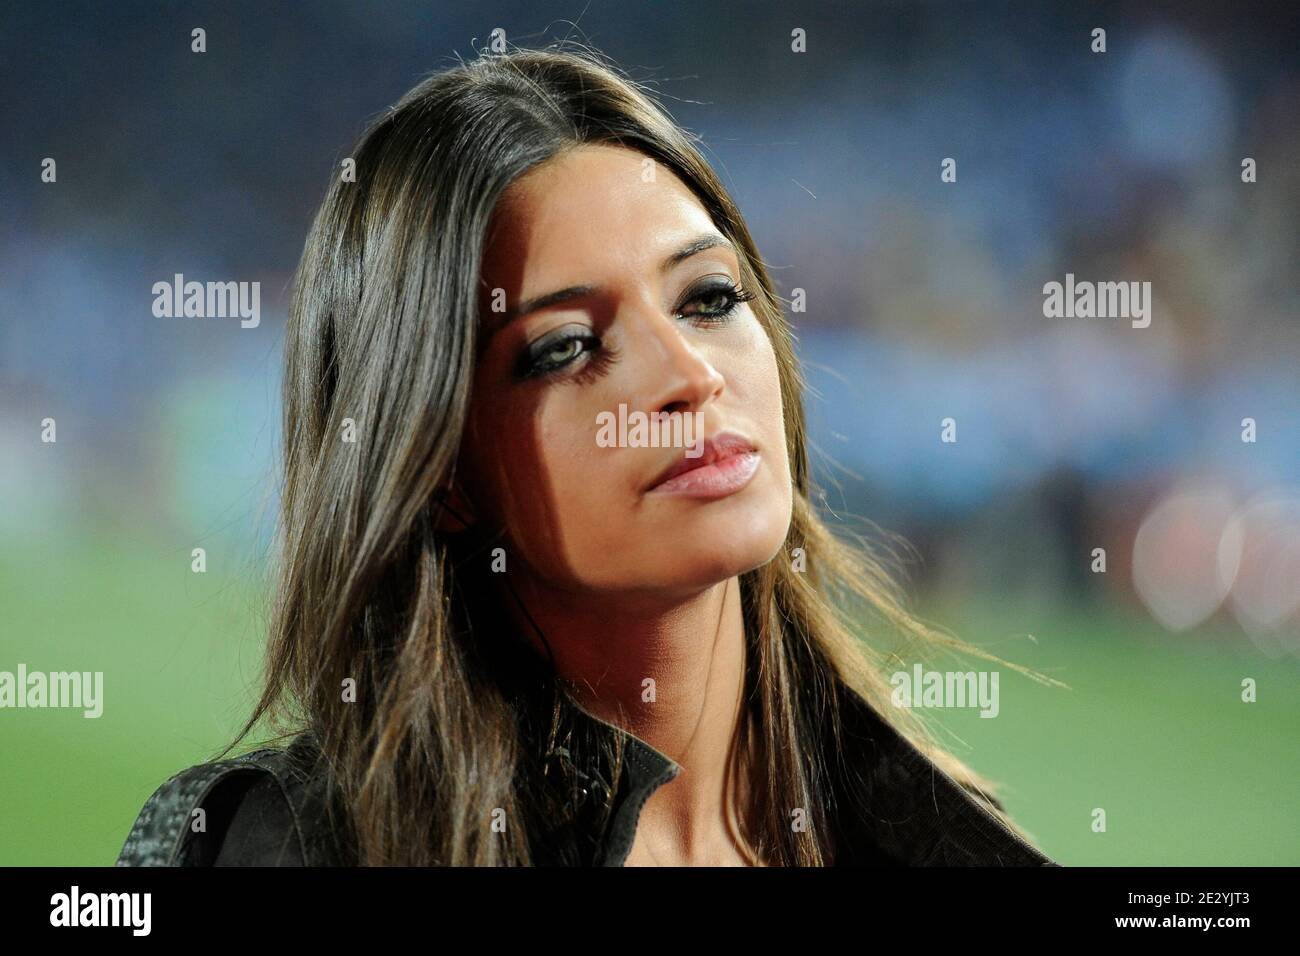 Spanish television journalist and Iker Casillas' girlfriend Sara Carbonero is seen ahead of the 2010 FIFA World Cup South Africa Soccer match, group H, Spain vs Honduras at Ellis Park football stadium in Johannesburg, South Africa on June 21, 2010. Spain won 2-0. Photo by Henri Szwarc/ABACAPRESS.COM Stock Photo